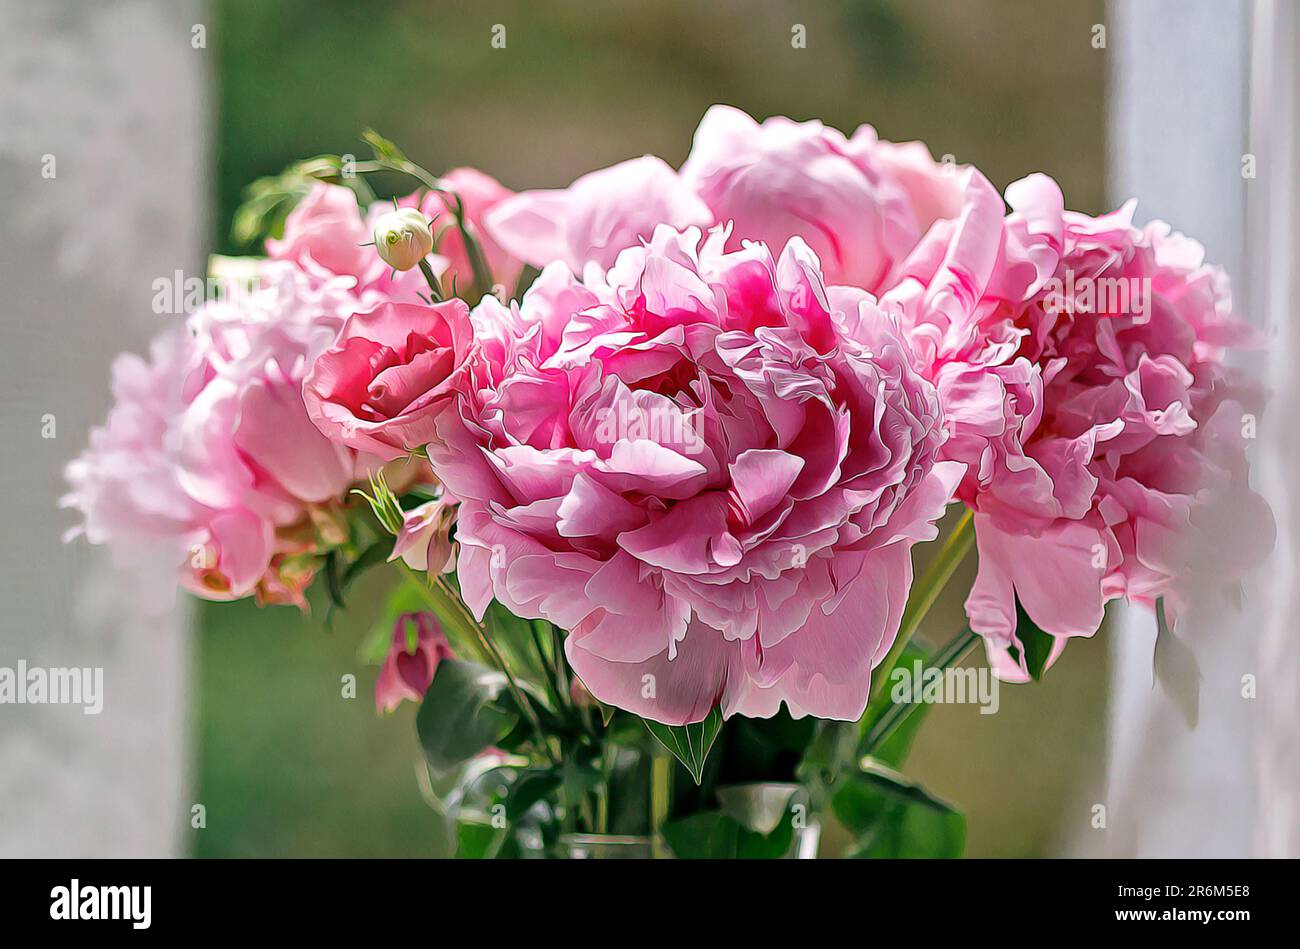 Bouquet of pink peonies in a vase on the window with the effect of oil pattern Stock Photo